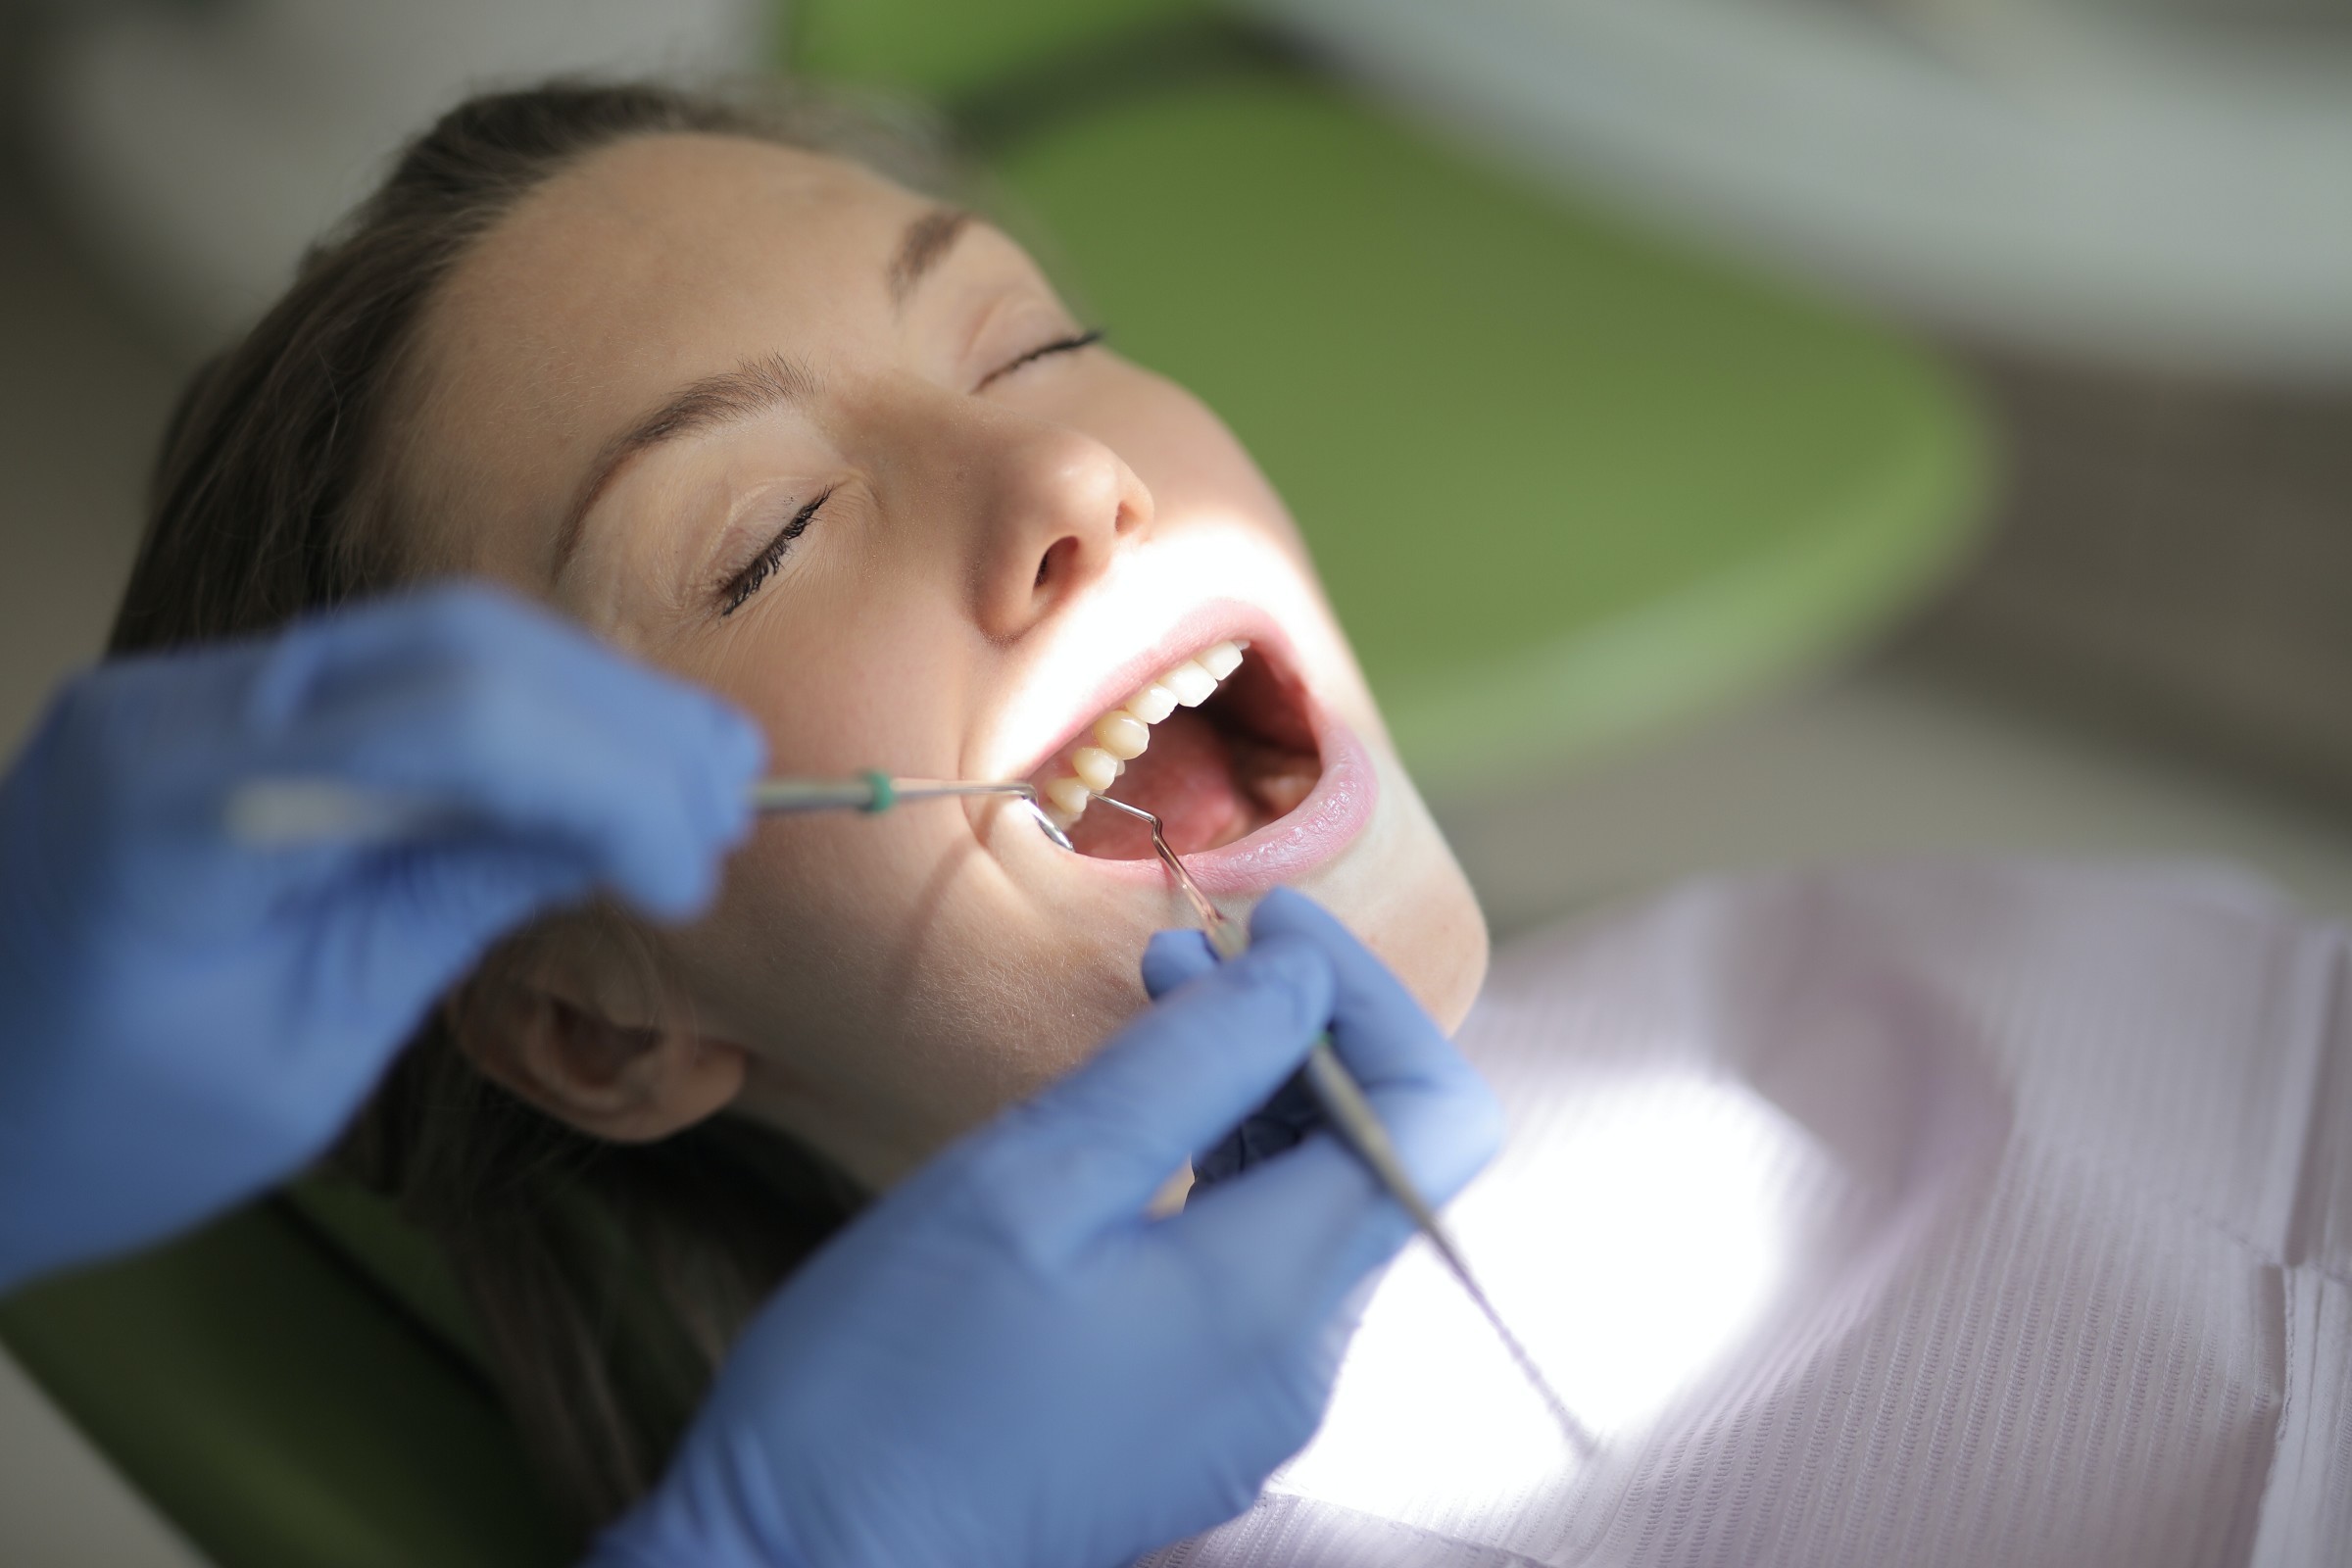 Best Dentist in Bangalore | Dentist near me | U.S.A. Dentists trained